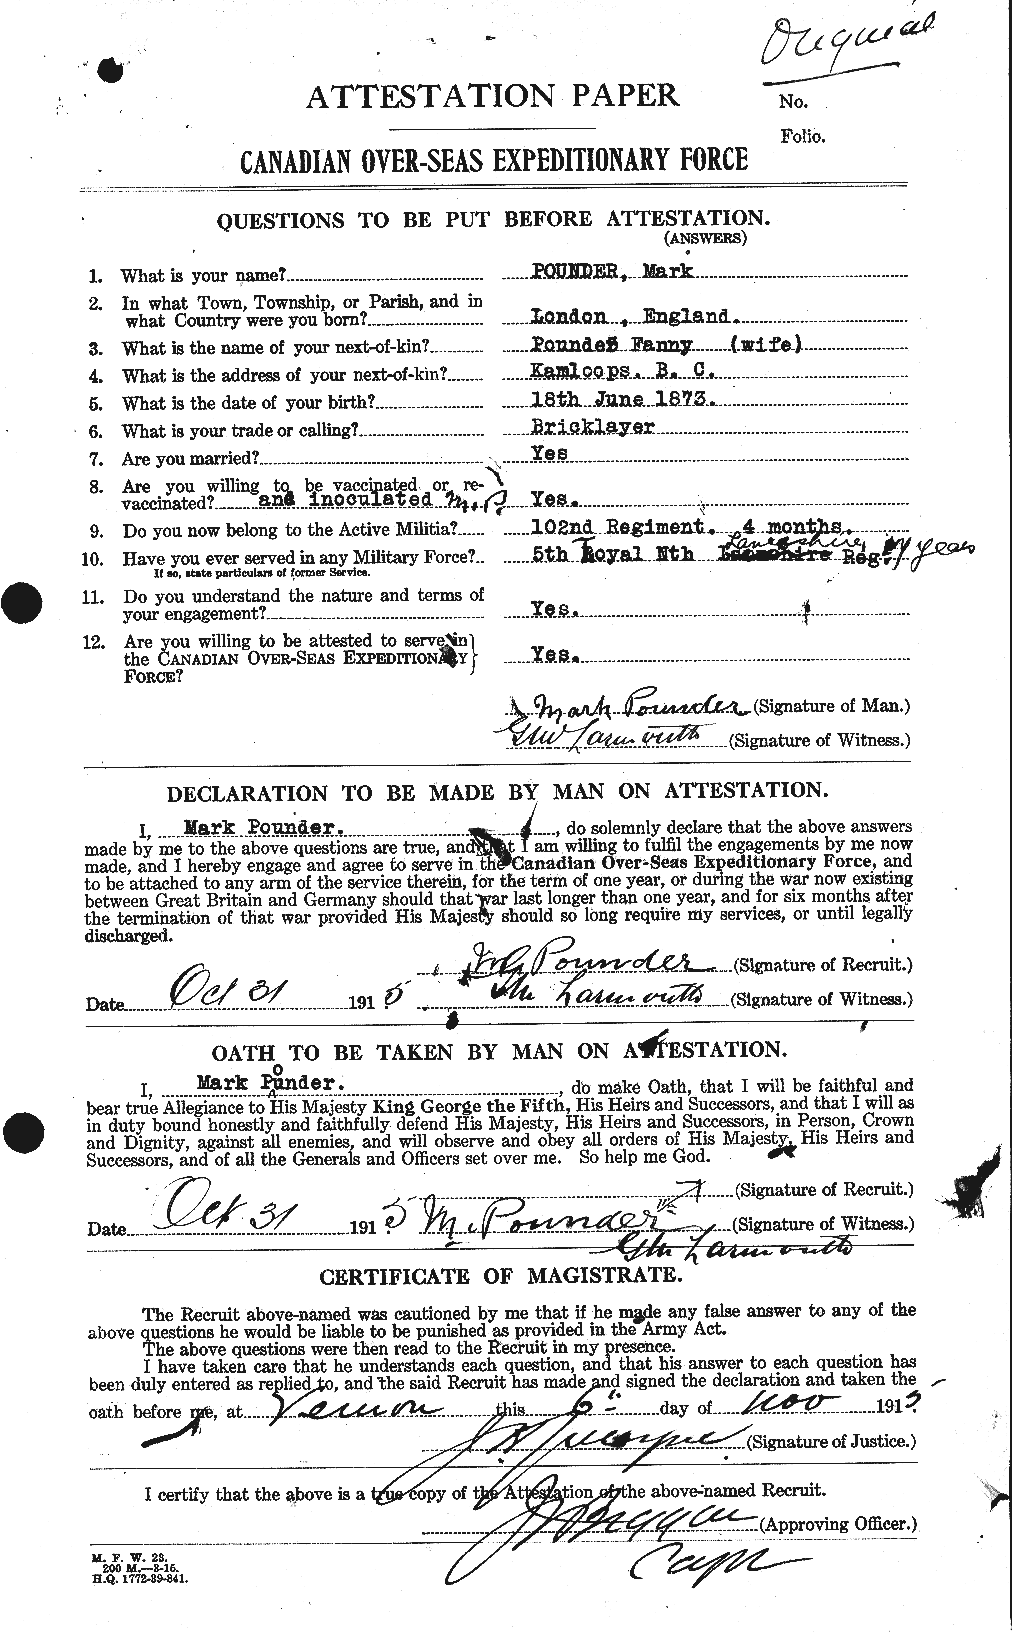 Personnel Records of the First World War - CEF 584987a